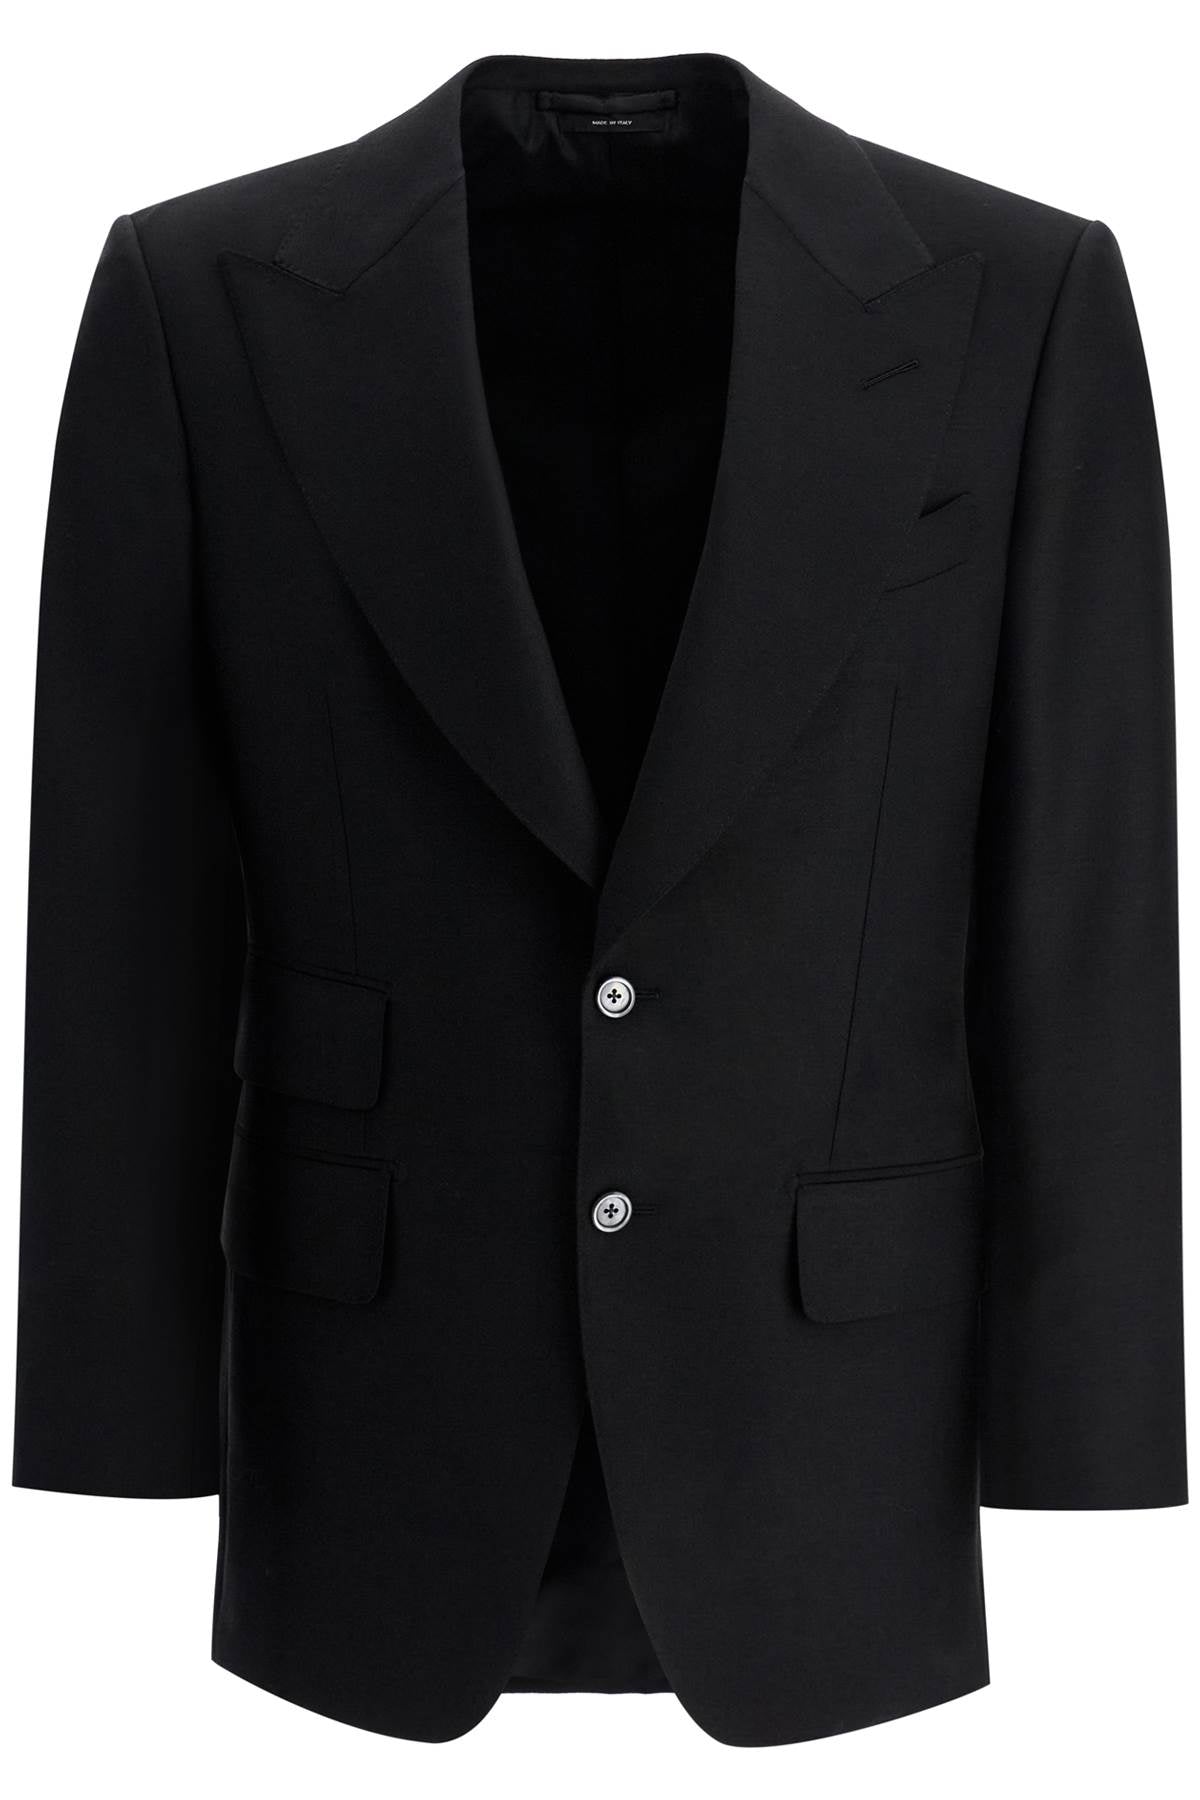 TOM FORD ATTICUS SINGLE-BREASTED JACKET IN WOOL AND